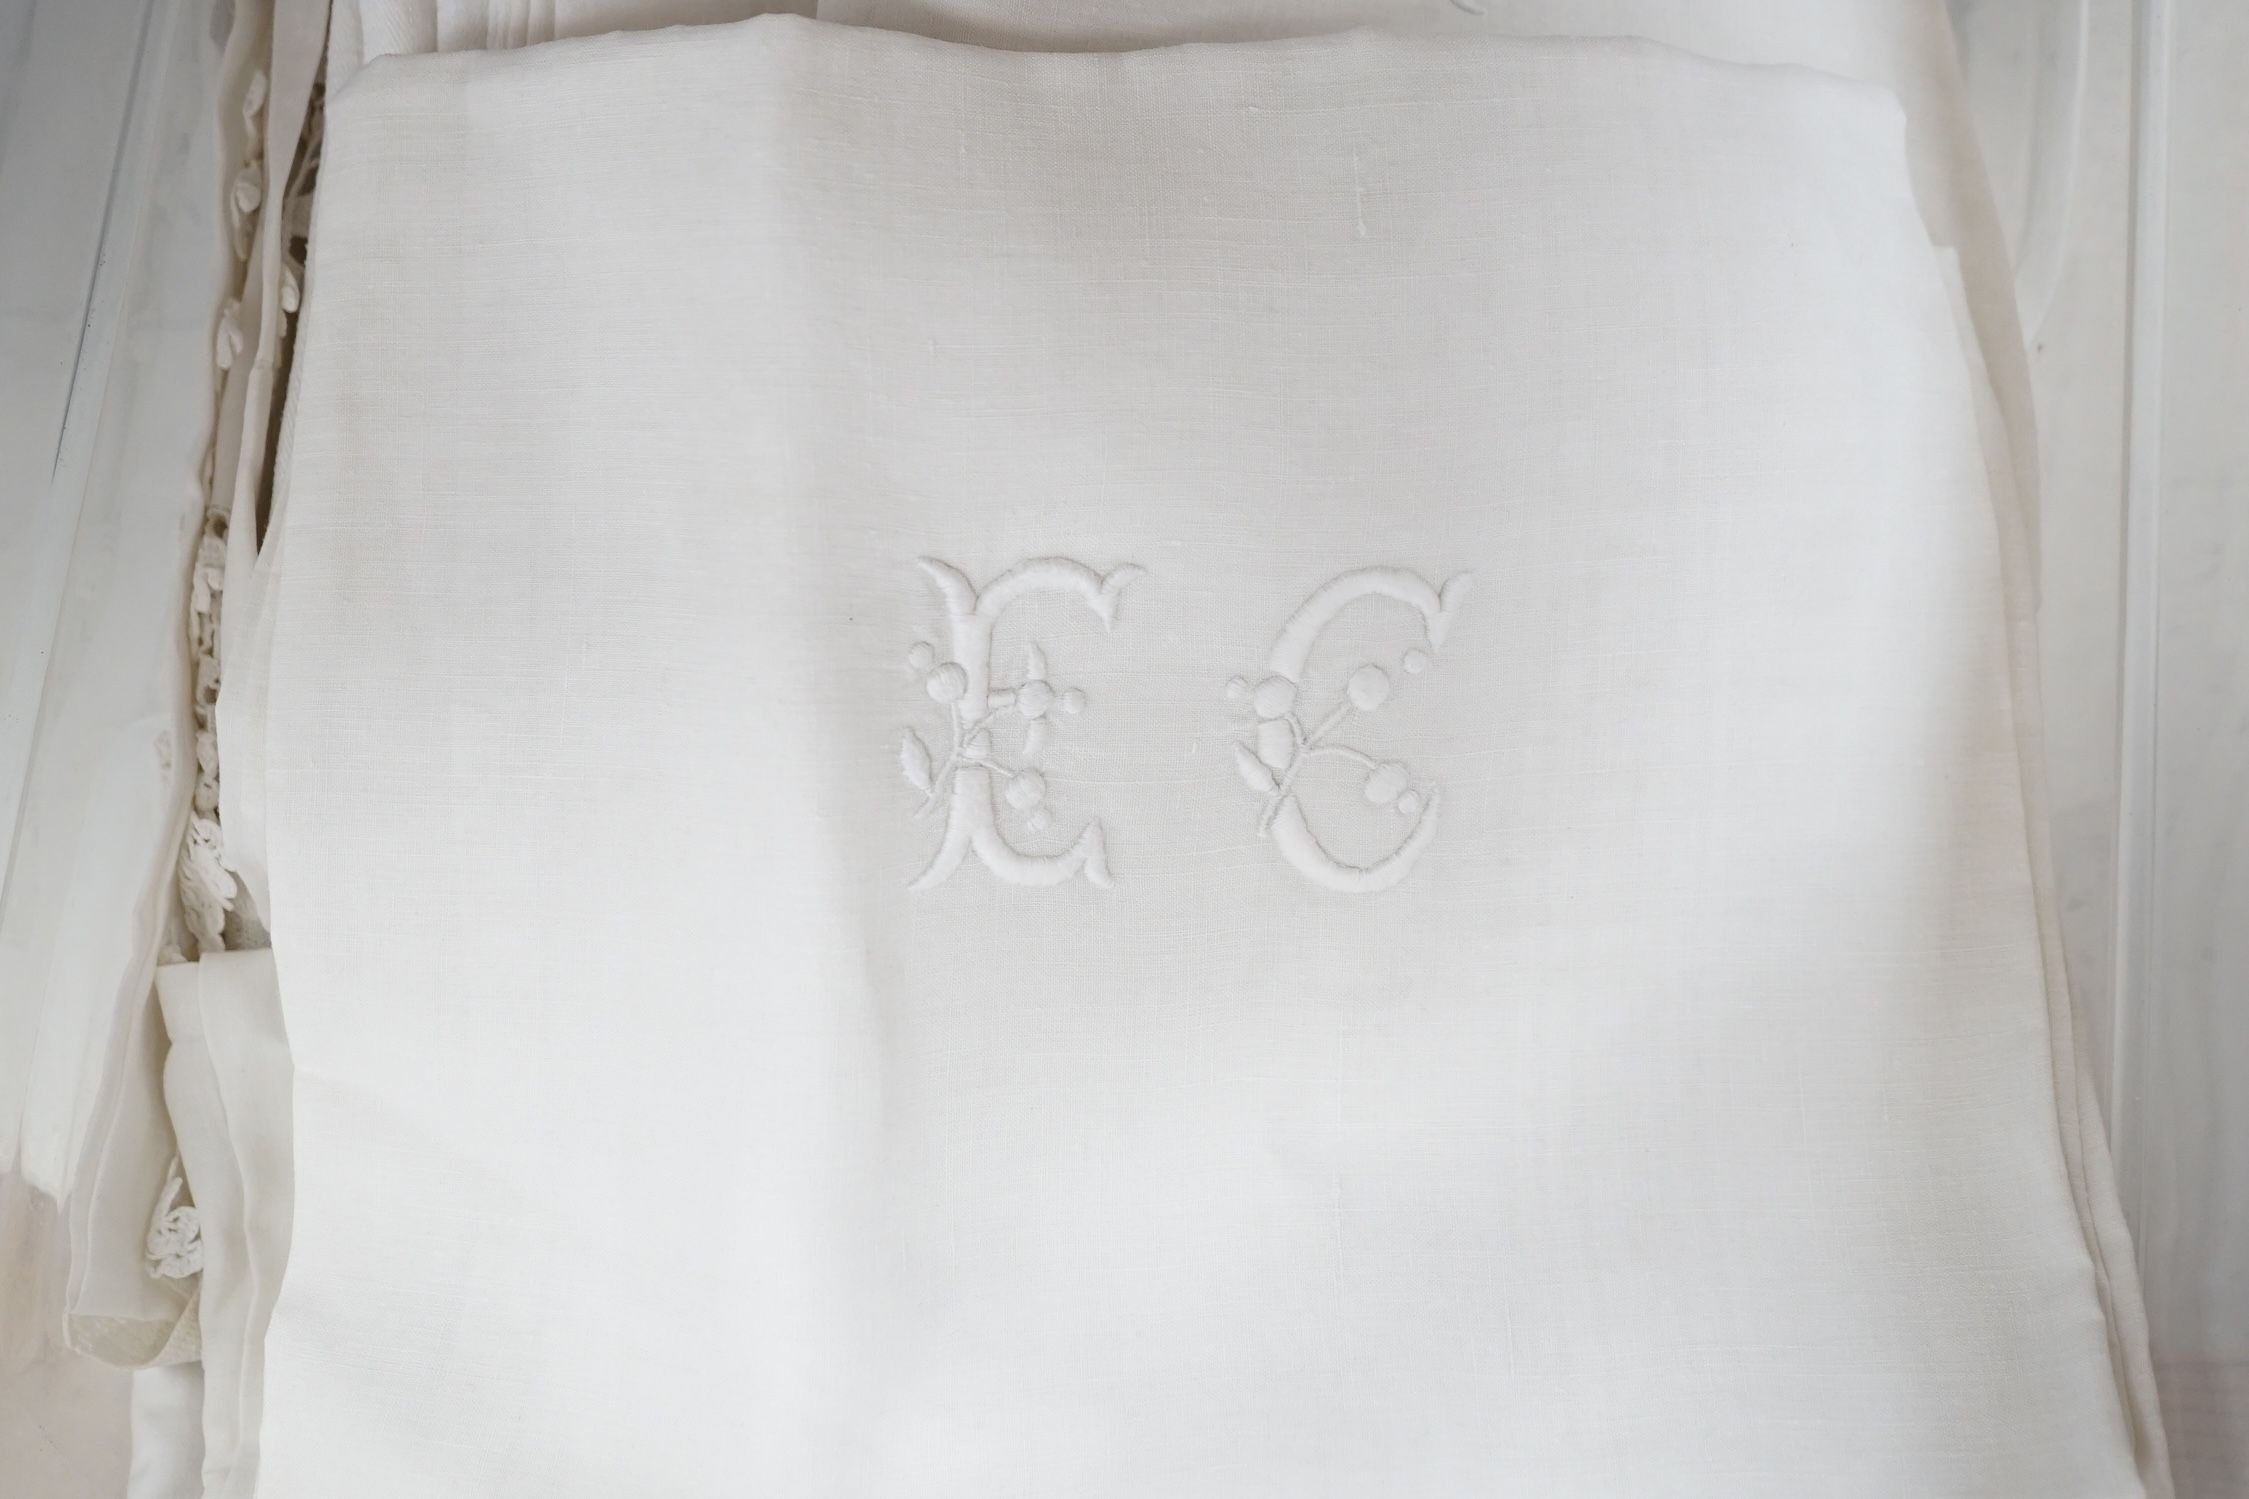 Two large linen white-worked table cloths, a collection of smaller crochet cloths and various sized monogrammed linen napkins, all linen laundered and starched. Condition - good